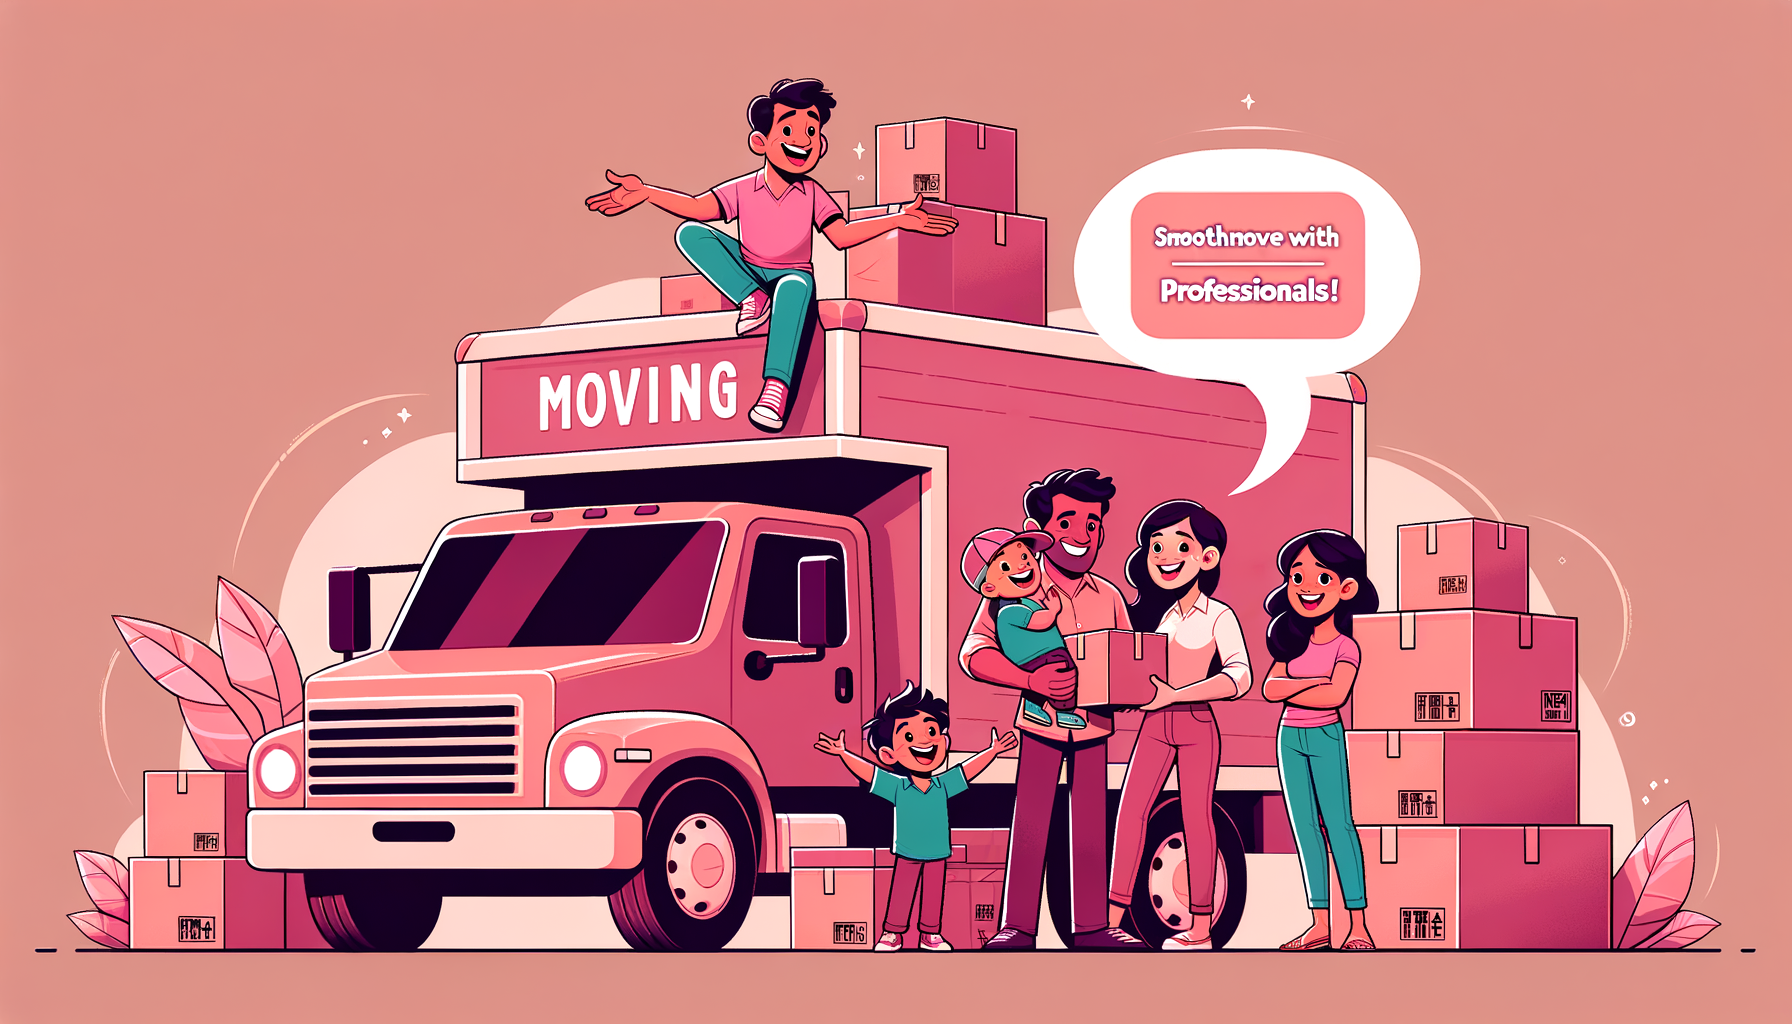 Cartoon illustration in fuschia tones showcasing a smiling moving truck, boxes, and a happy family.